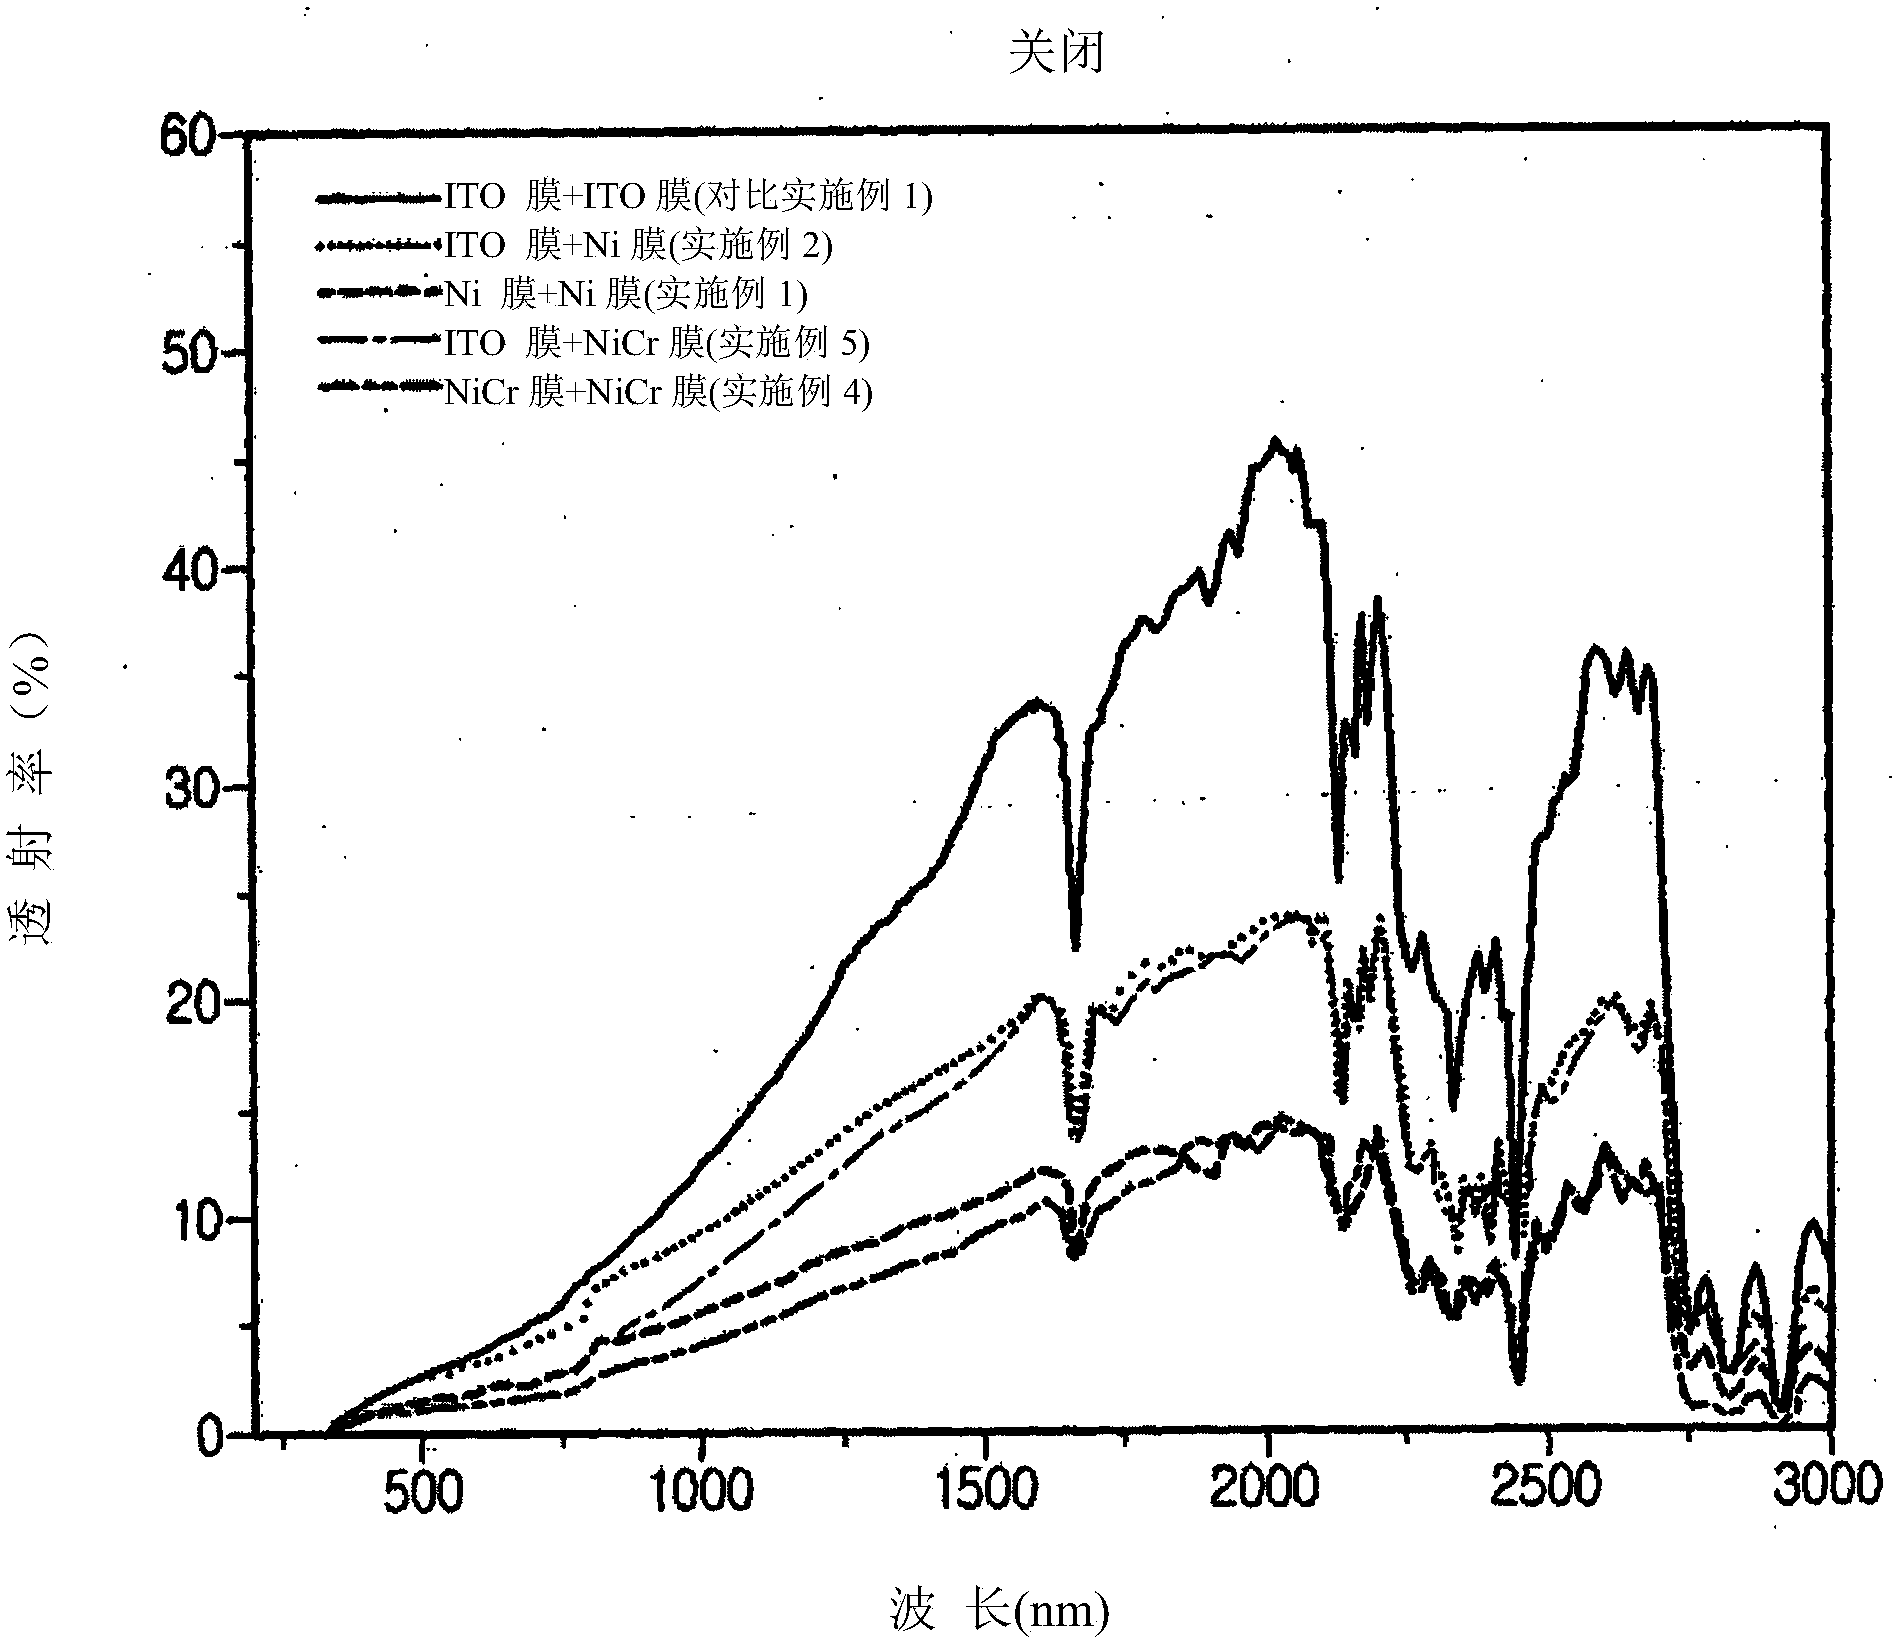 Polymer dispersed liquid crystal type light control body using nickel-based electrode, and manufacturing method thereof